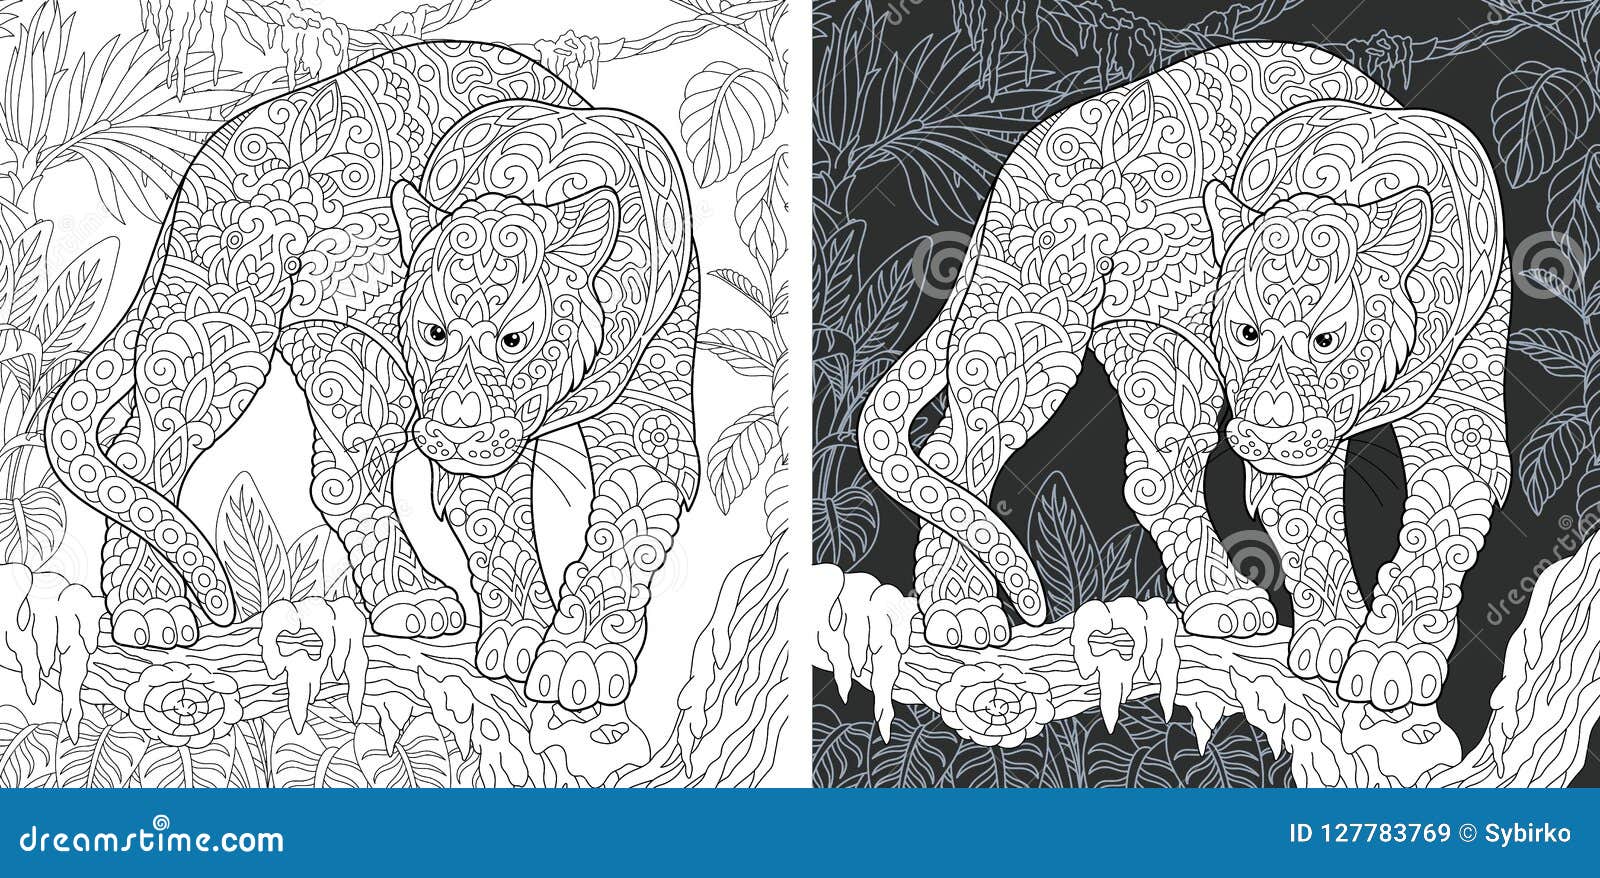 New Easy Coloring: 65 Large Print Images of Flowers, Animals, Food,  Landscapes, Fantasy Creatures, and More! (Easy Coloring Books for Adults)